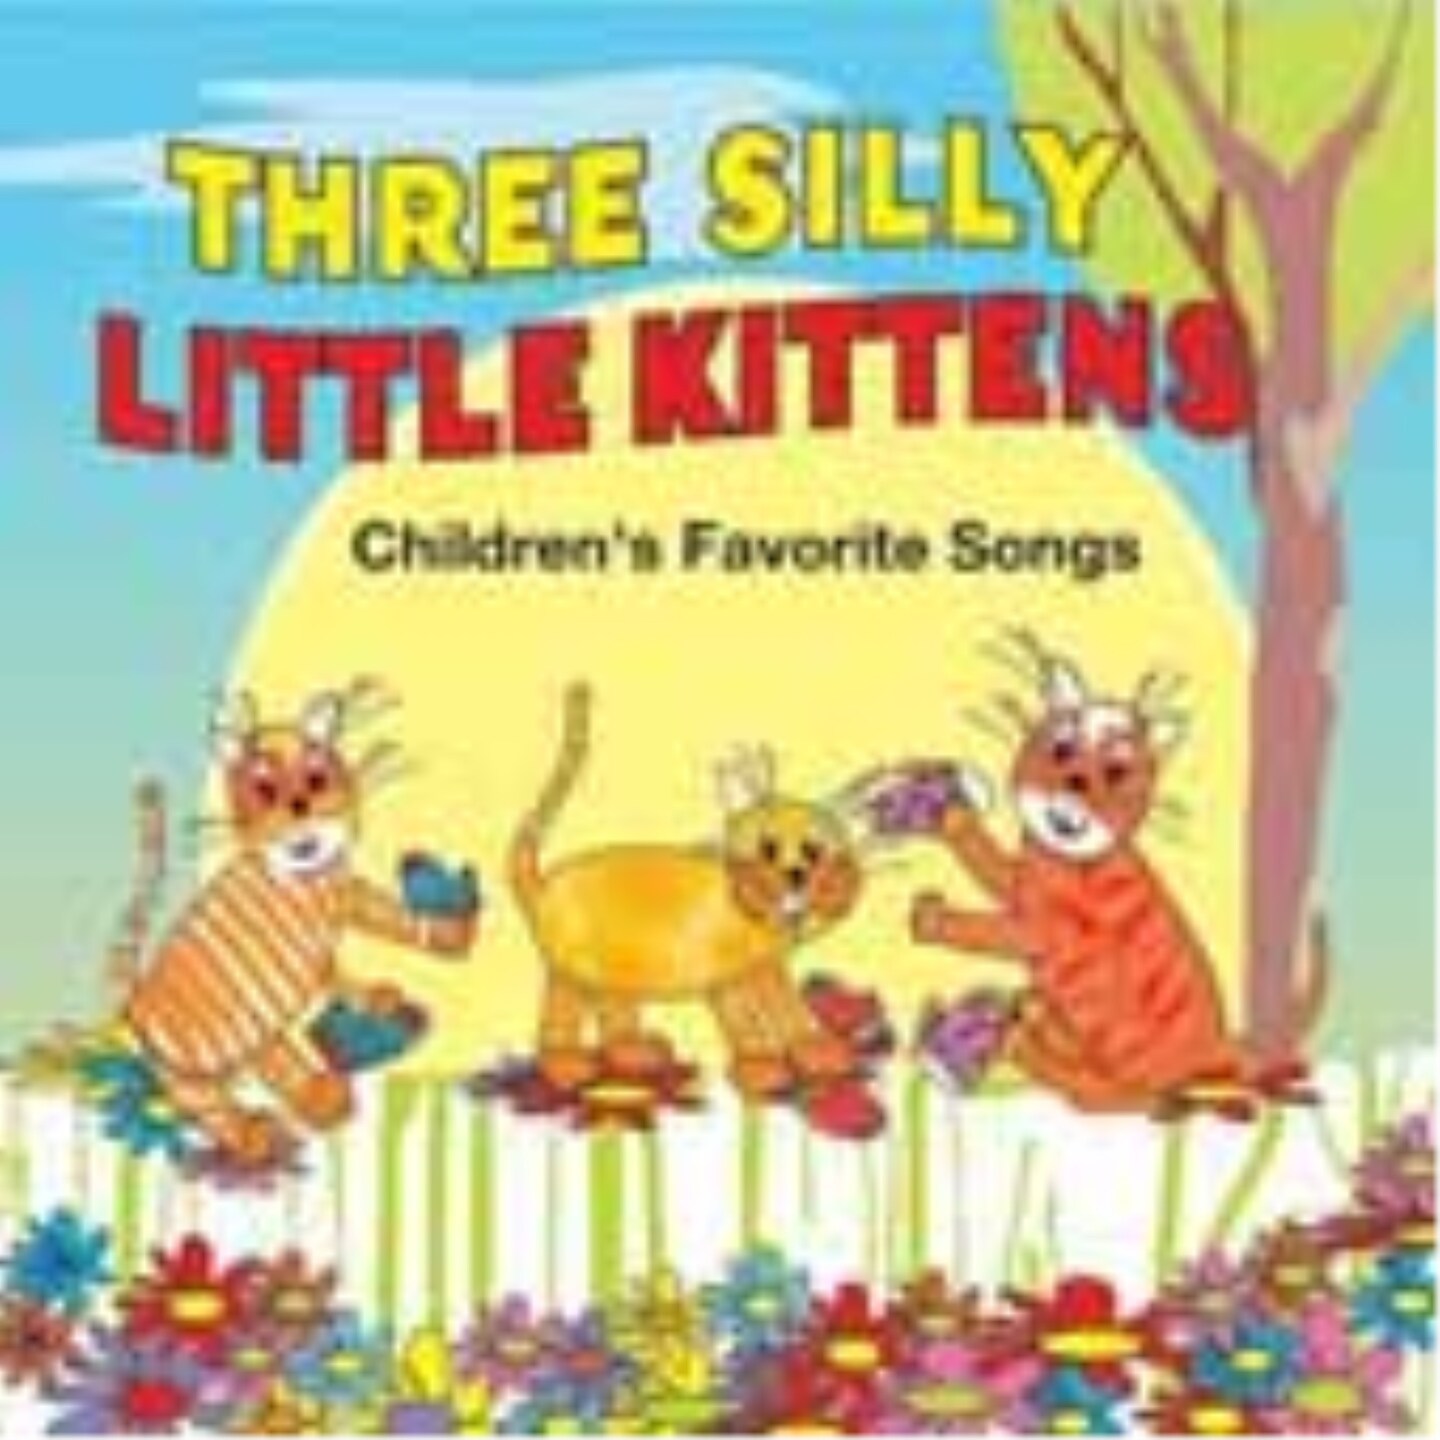 Three Silly Little Kittens Educational CD